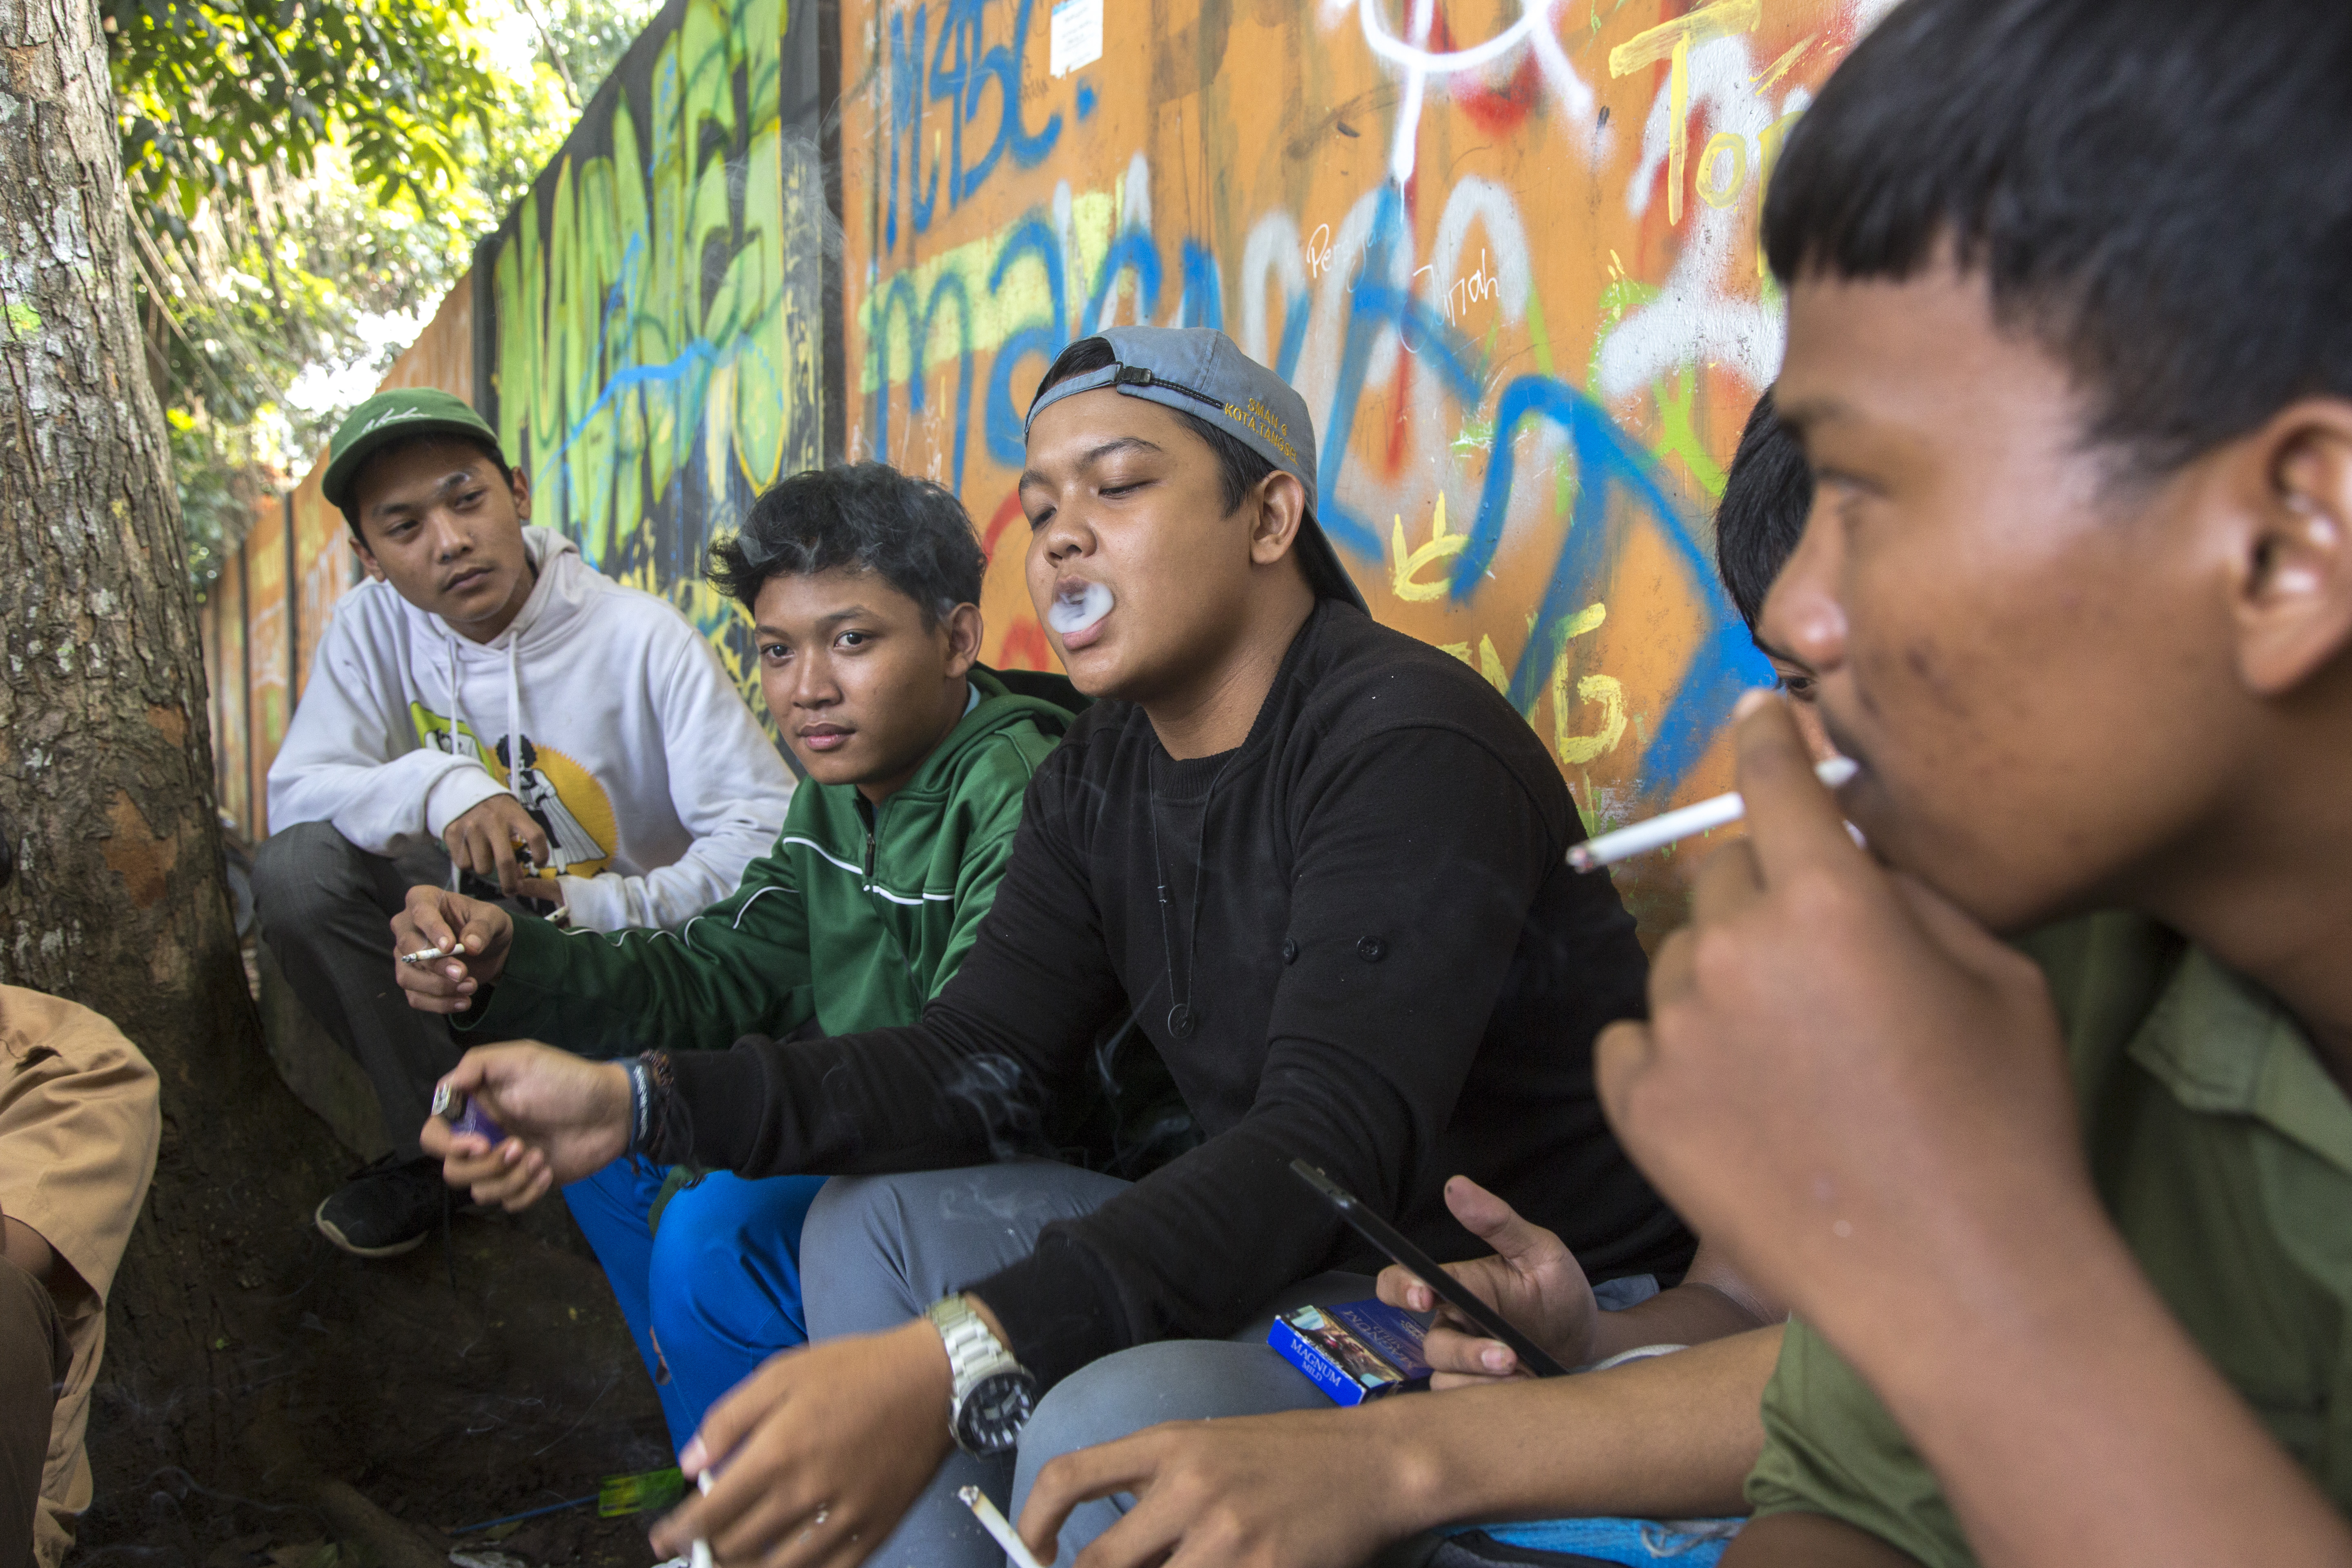 Students hang out after school while smoking cigarretes in Bogor, West Java.